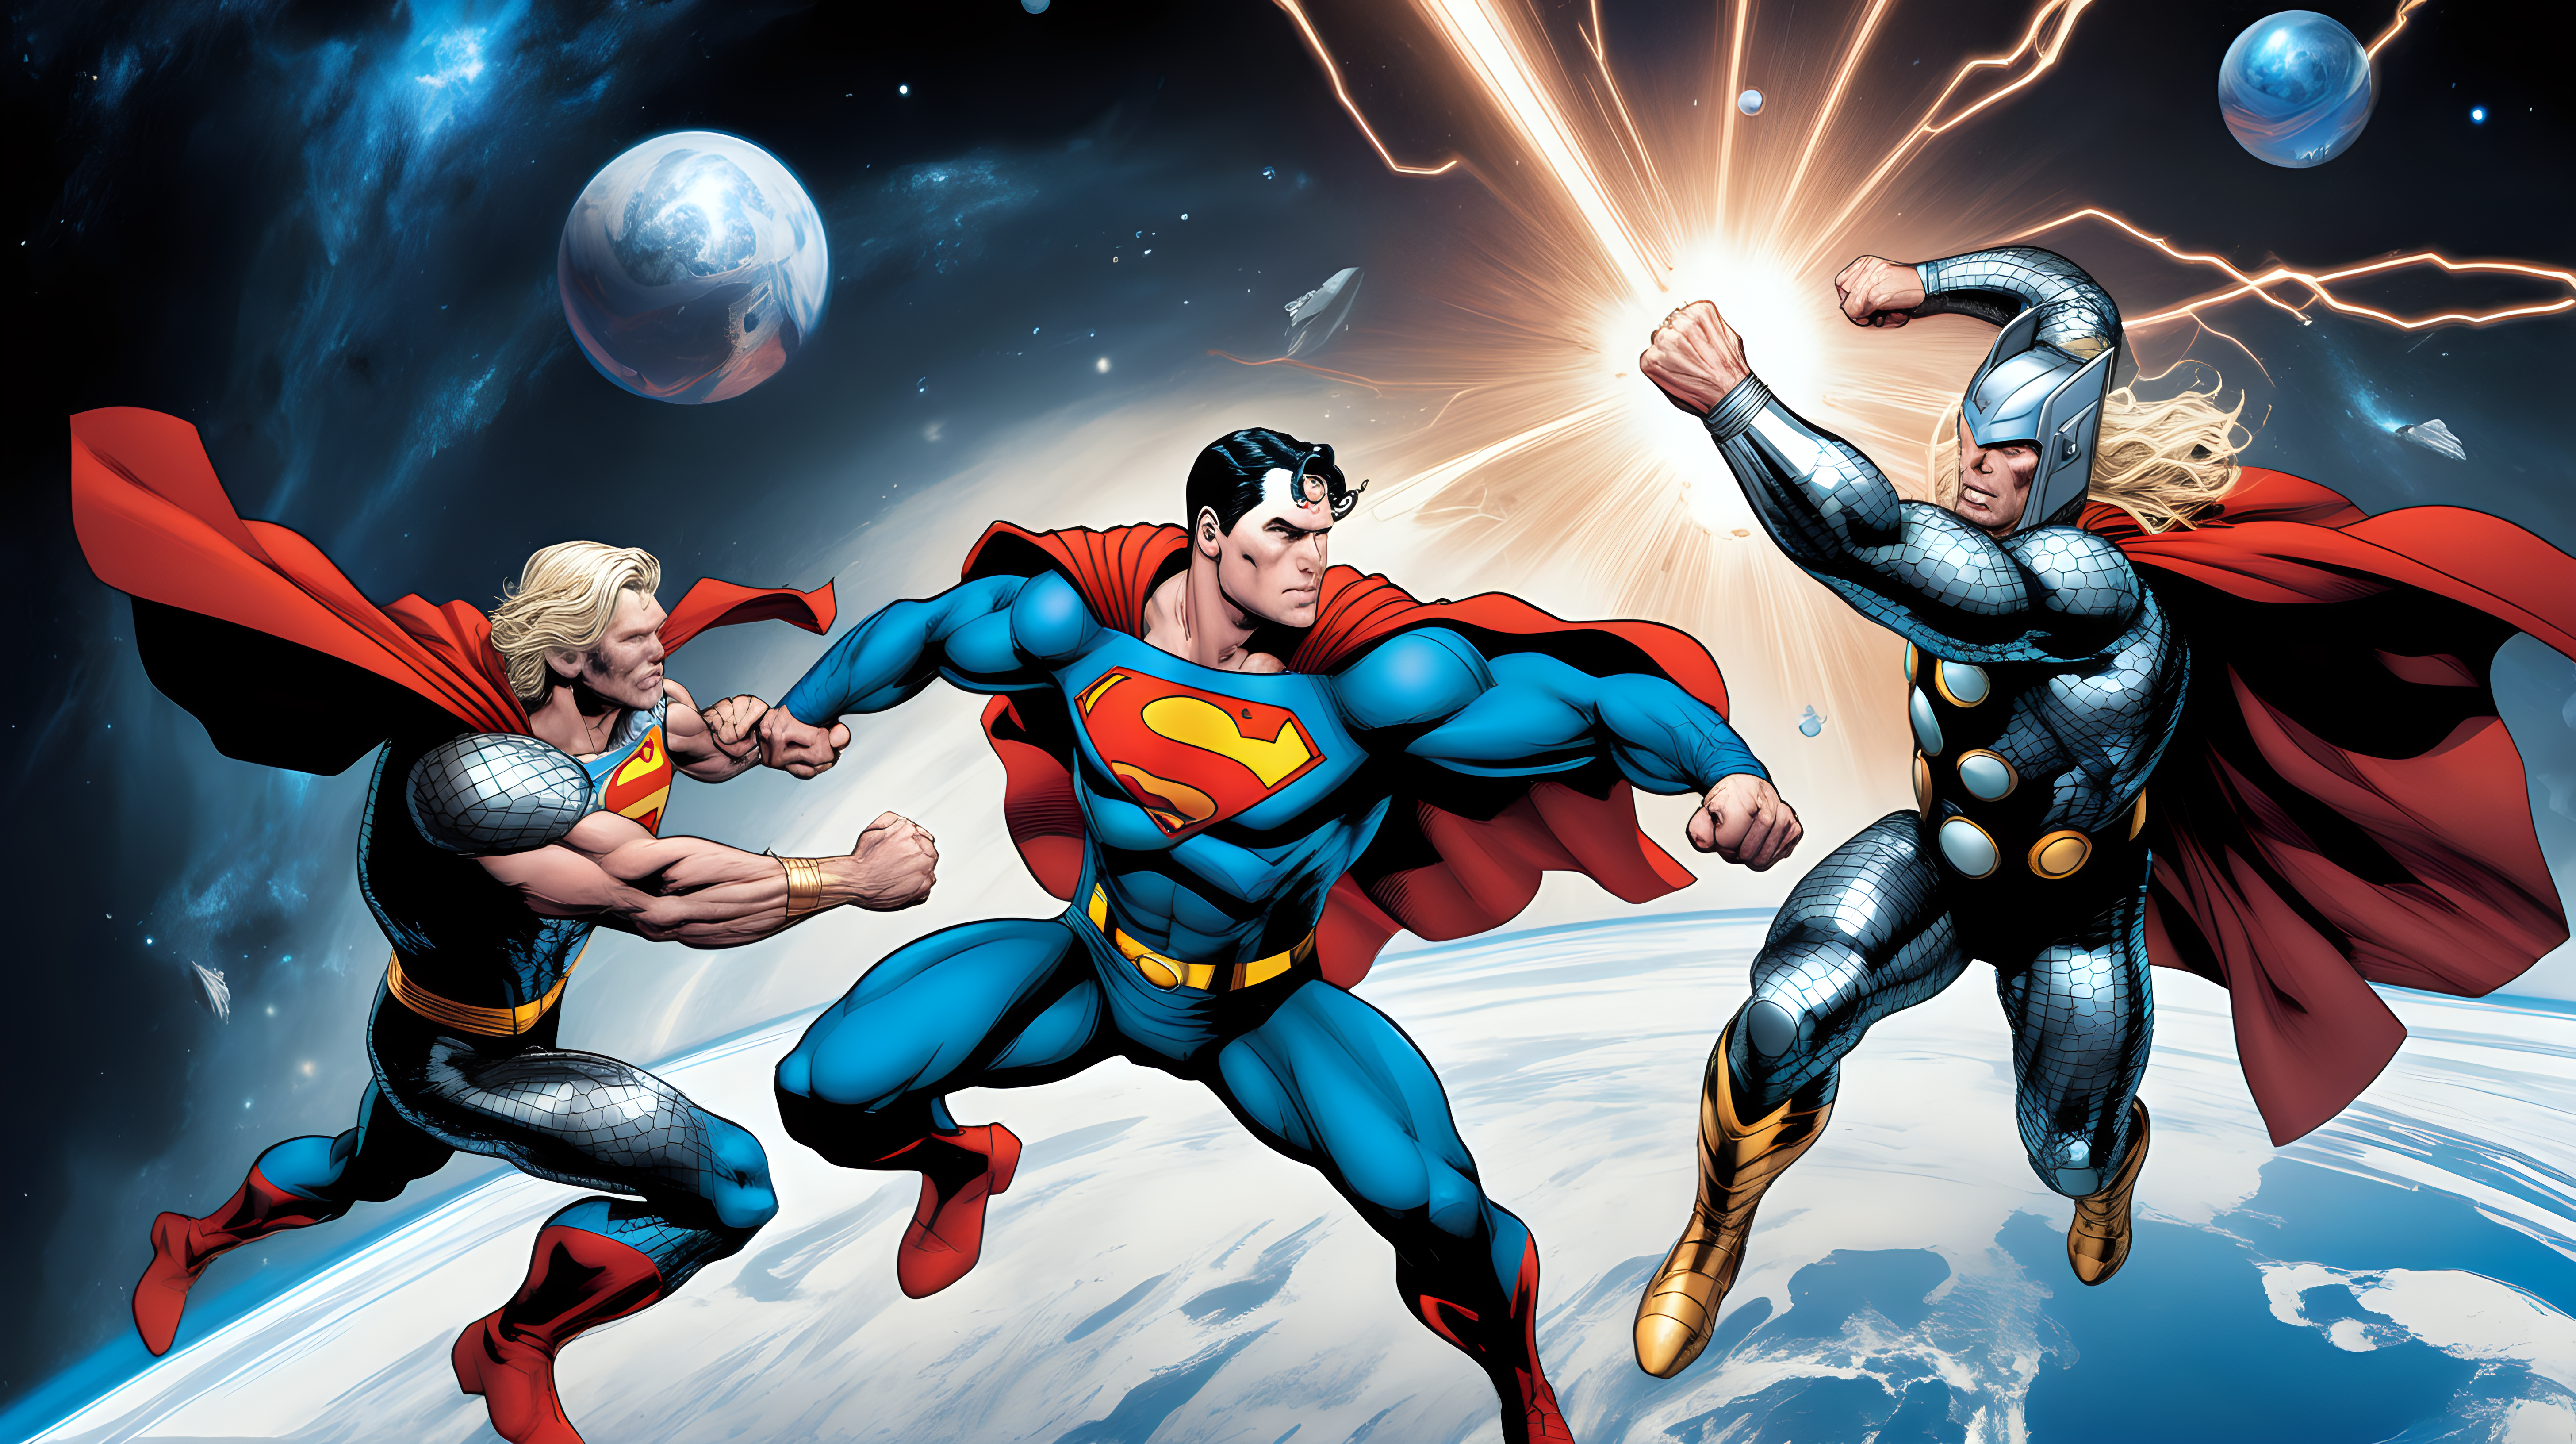 Superman fights Thor in space